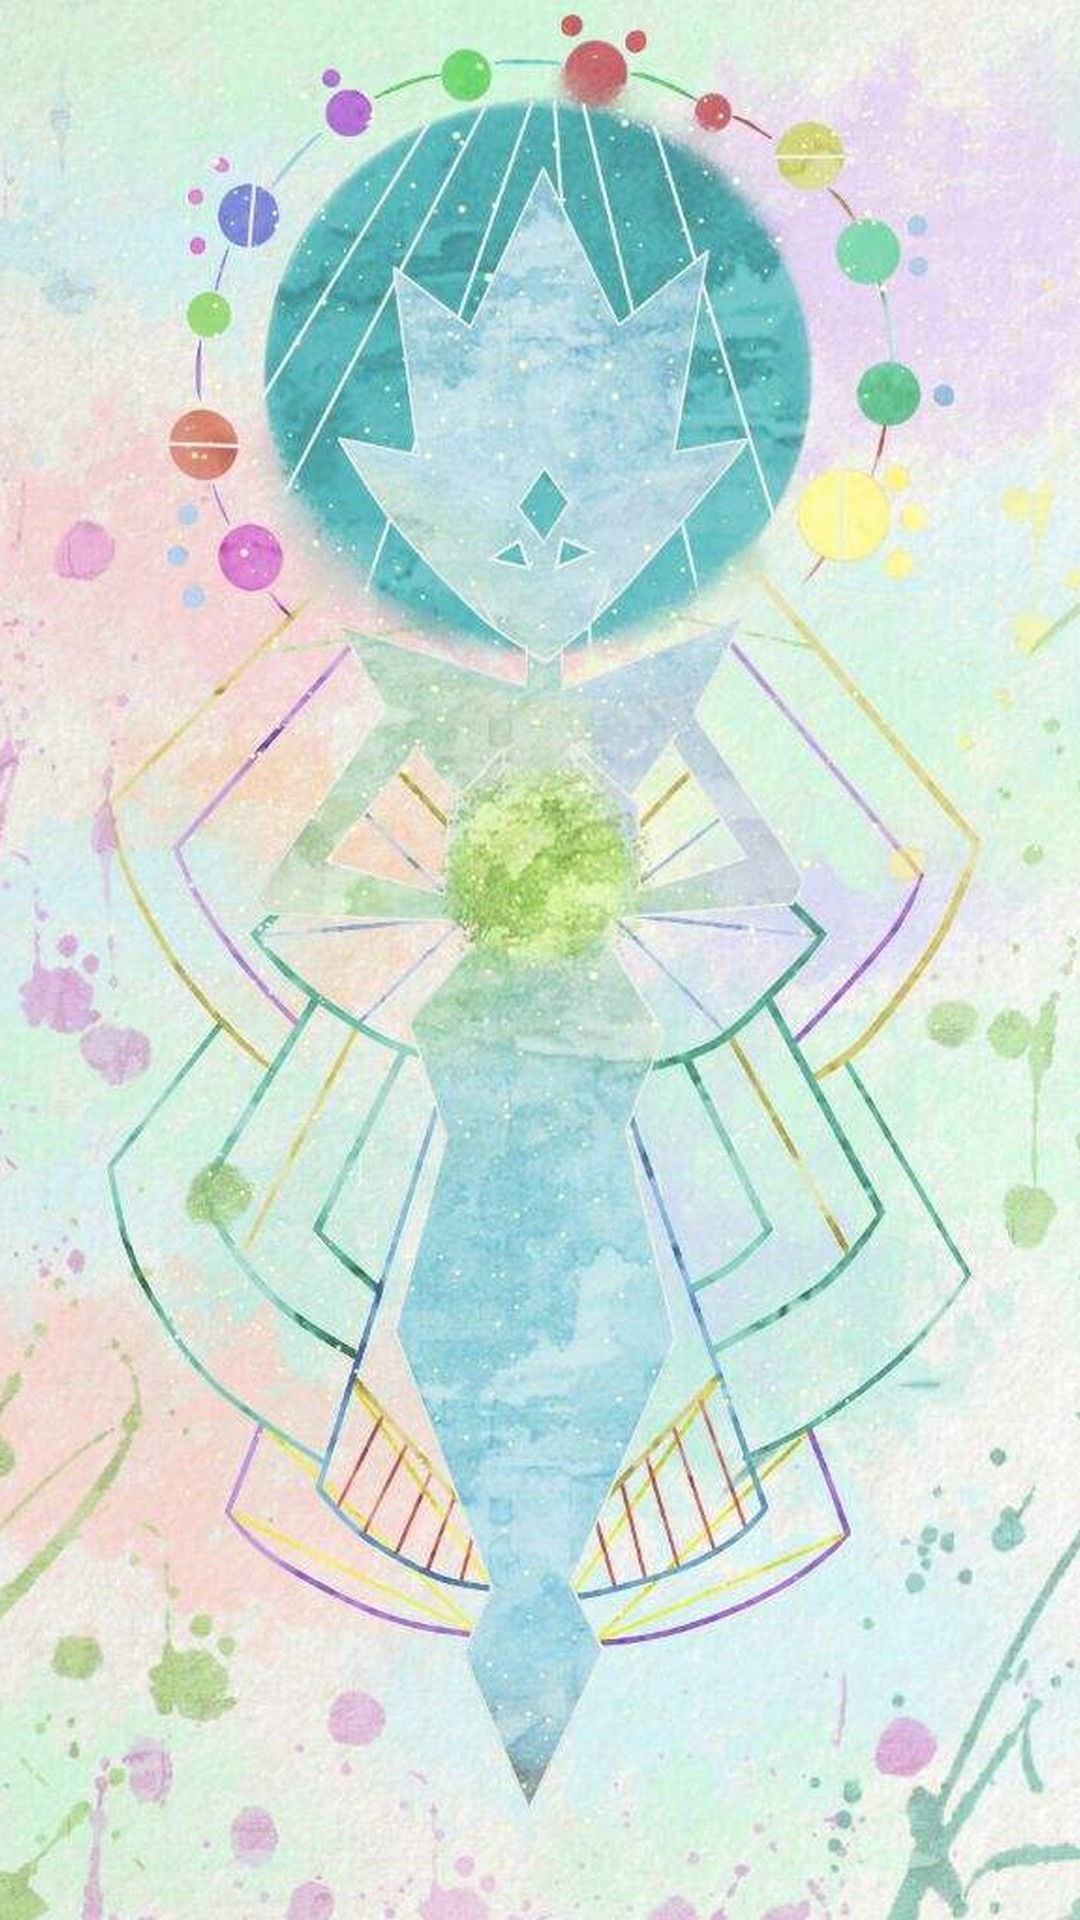 Wallpaper Android Steven Universe With high-resolution 1080X1920 pixel. You can use this wallpaper for your Android backgrounds, Tablet, Samsung Screensavers, Mobile Phone Lock Screen and another Smartphones device